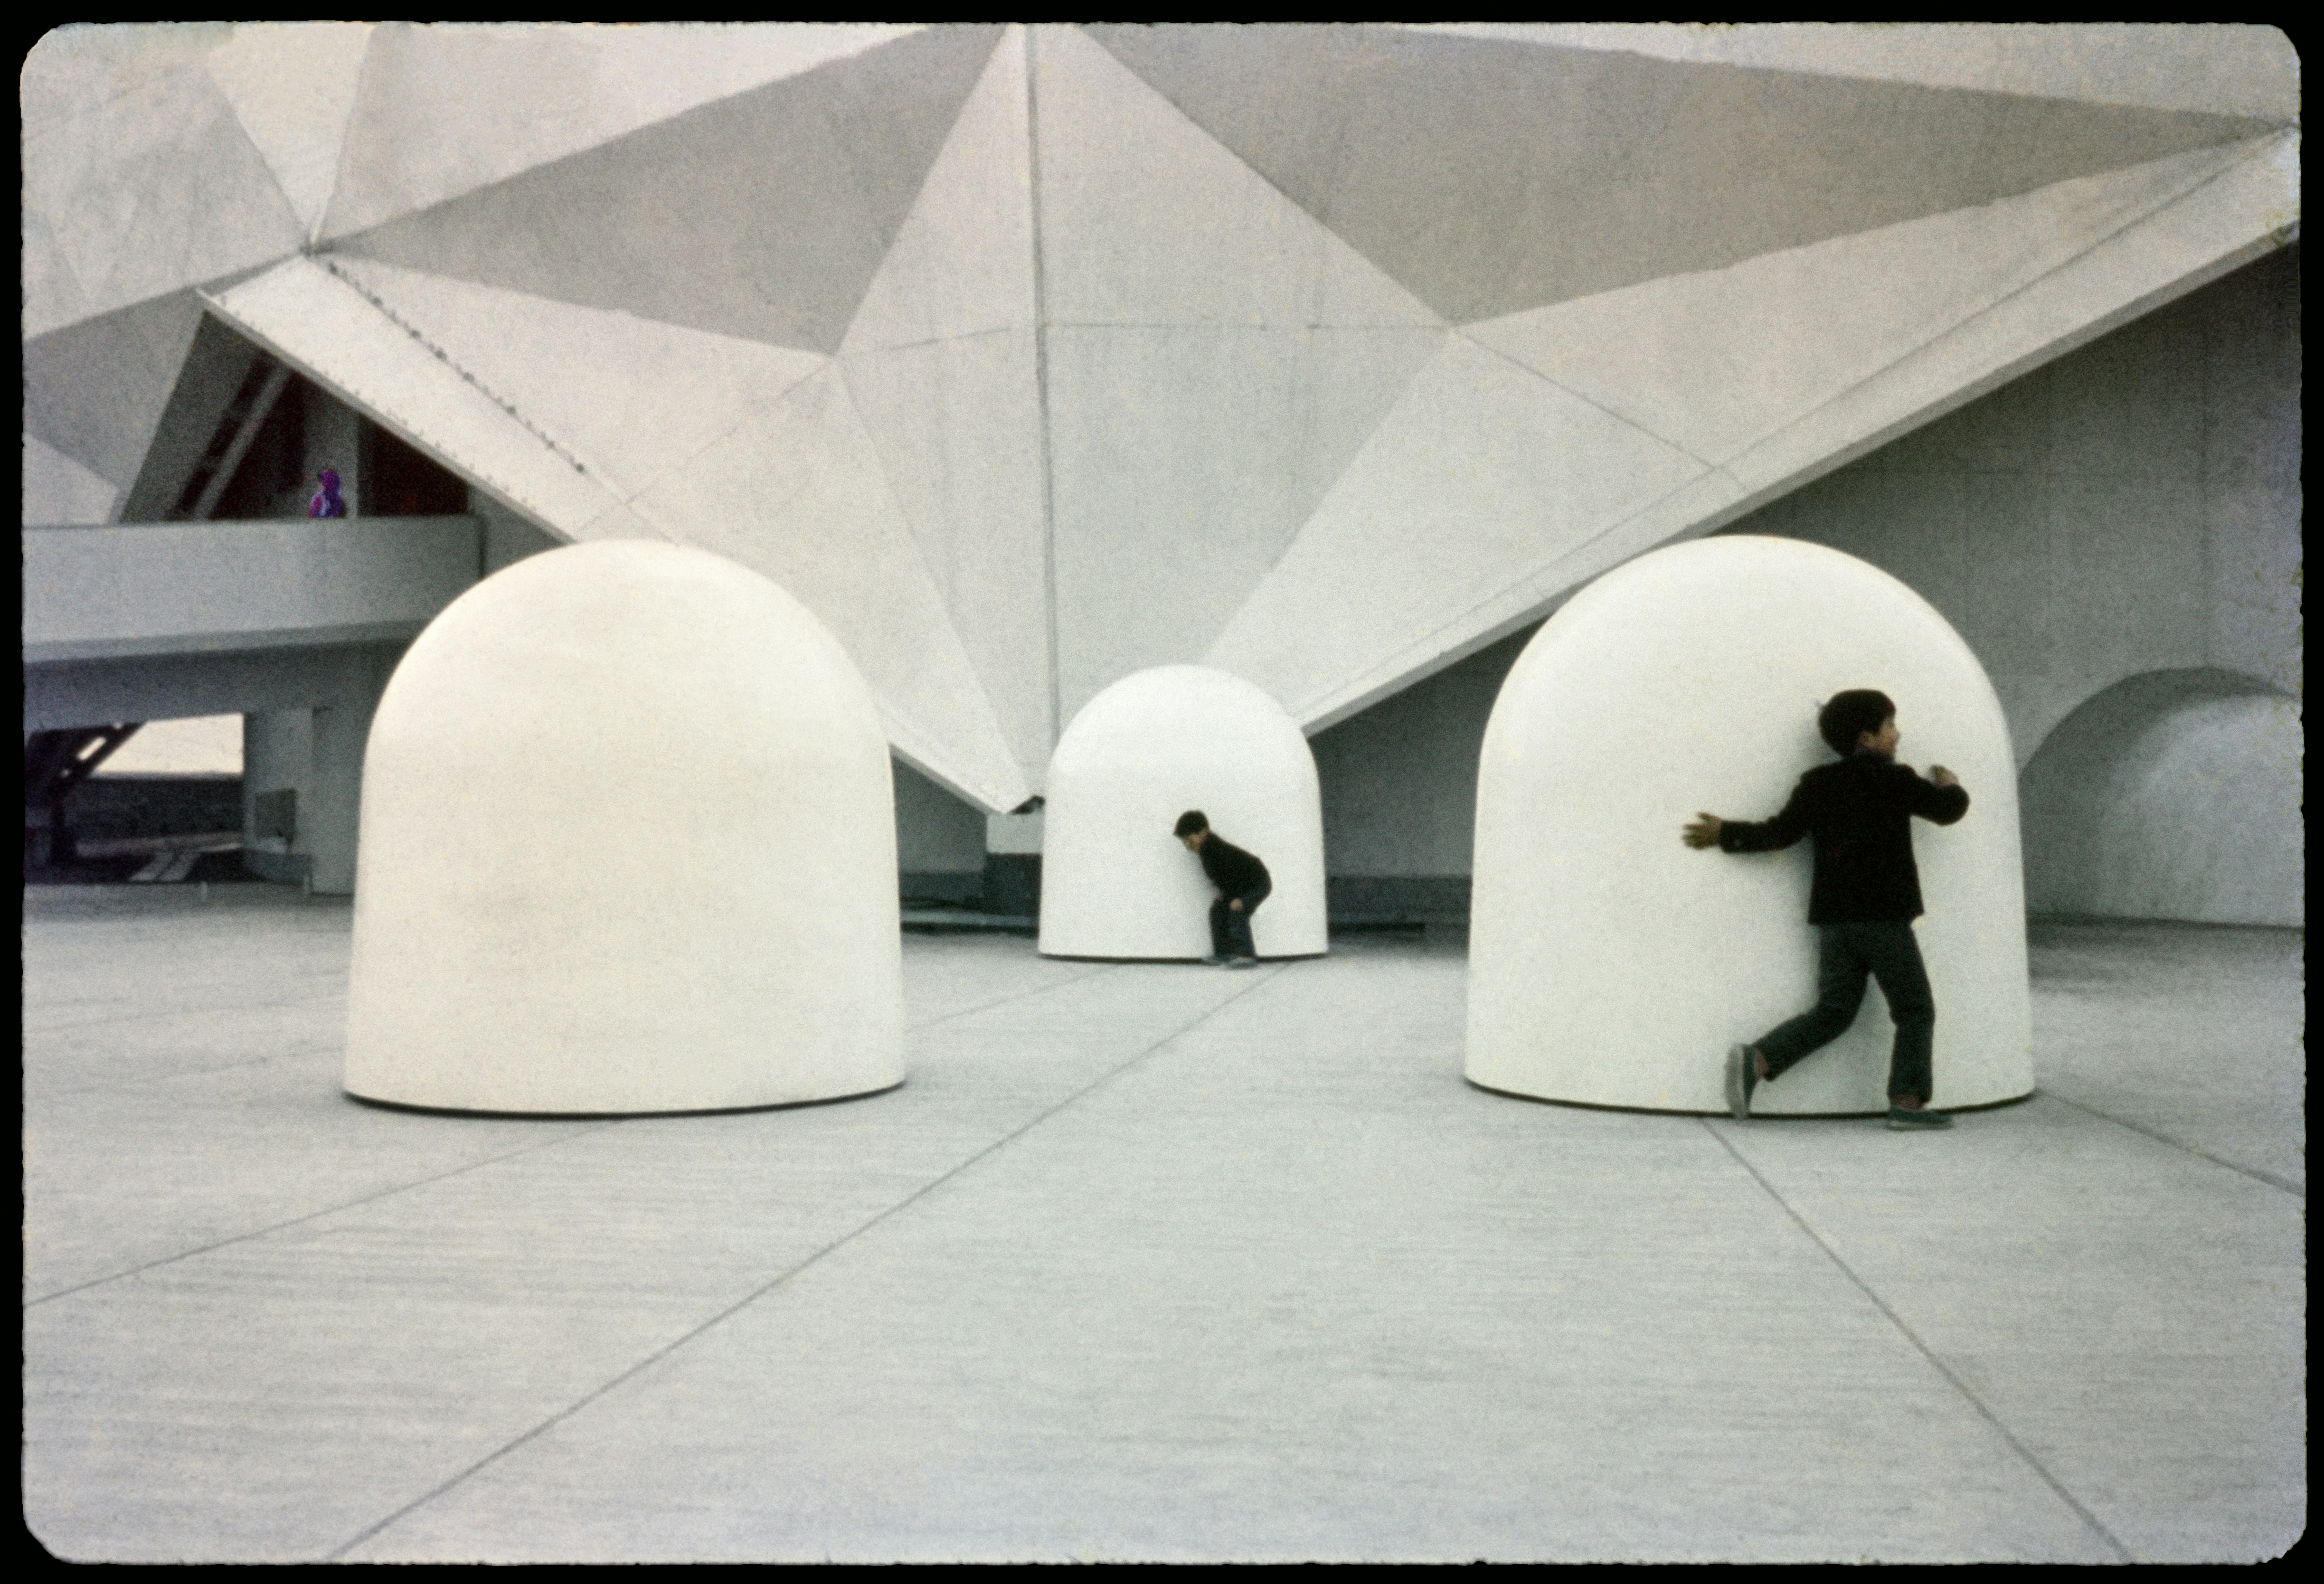 Robert Breer’s Floats, 1970 outside a model construction of the Pepsi-Cola Pavilion. Chromogenic process. Photograph by Shunk-Kender. ©J. Paul Getty Trust. Getty Research Institute, Los Angeles and Robert Breer.